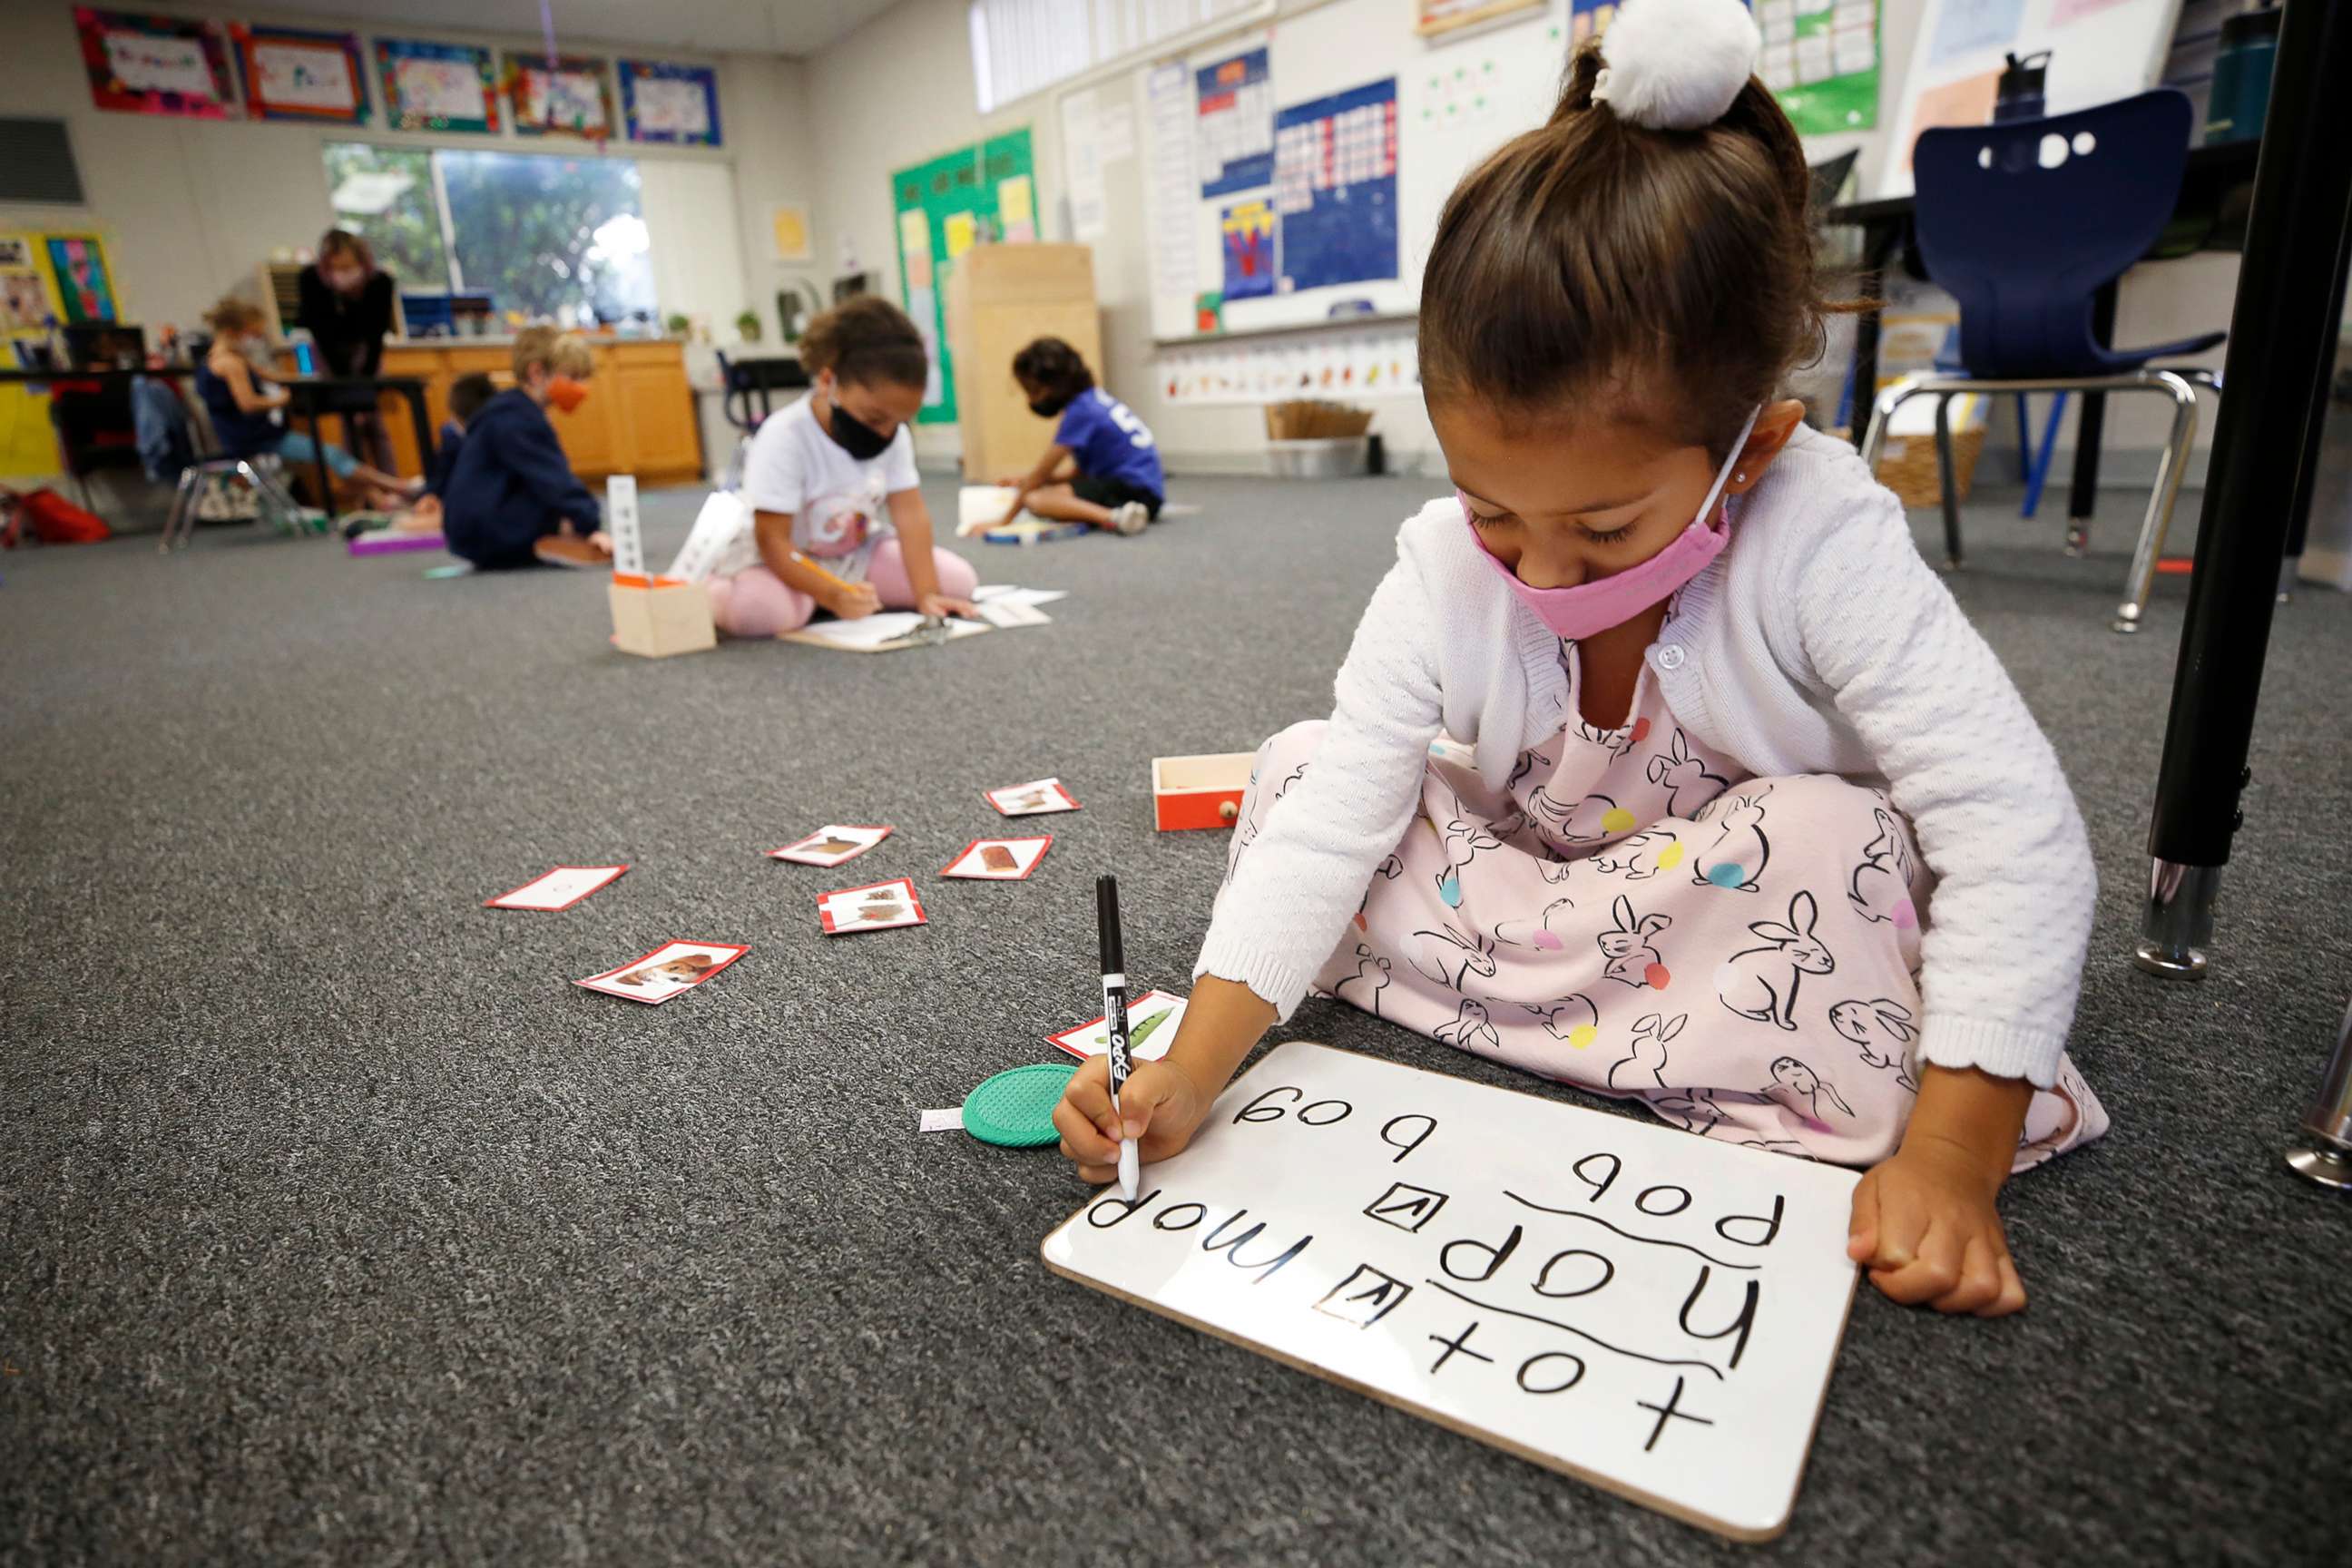 PHOTO: Kindergarten students Amelia Ramirez, front, and Naomi Cooney, back, distance themselves while working in the classroom at Chadwick School in Palos Verdes, Calif., Nov. 5, 2020.